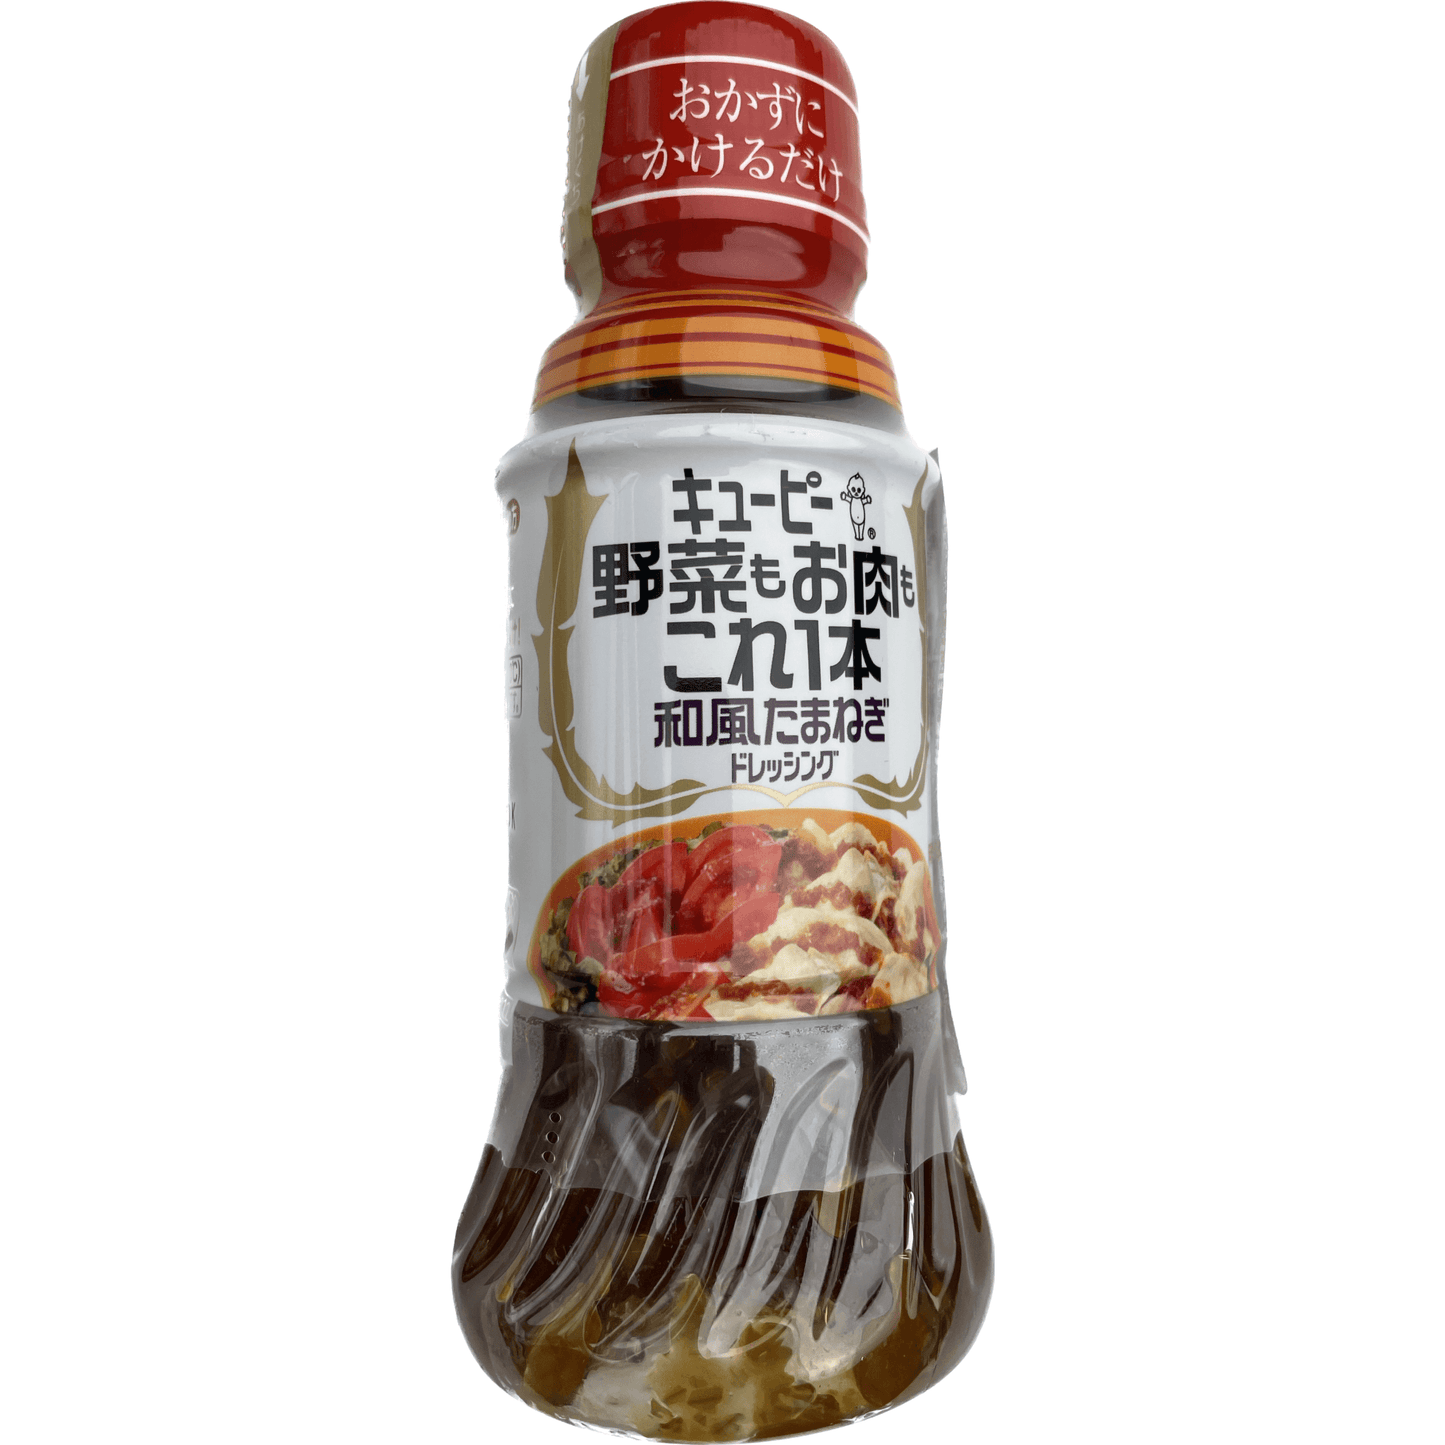 Kewpie vegetables and meat in one, Japanese-style onion キューピー　野菜もお肉もこれ1本　和風たまねぎ 200ml - RiceWineShop